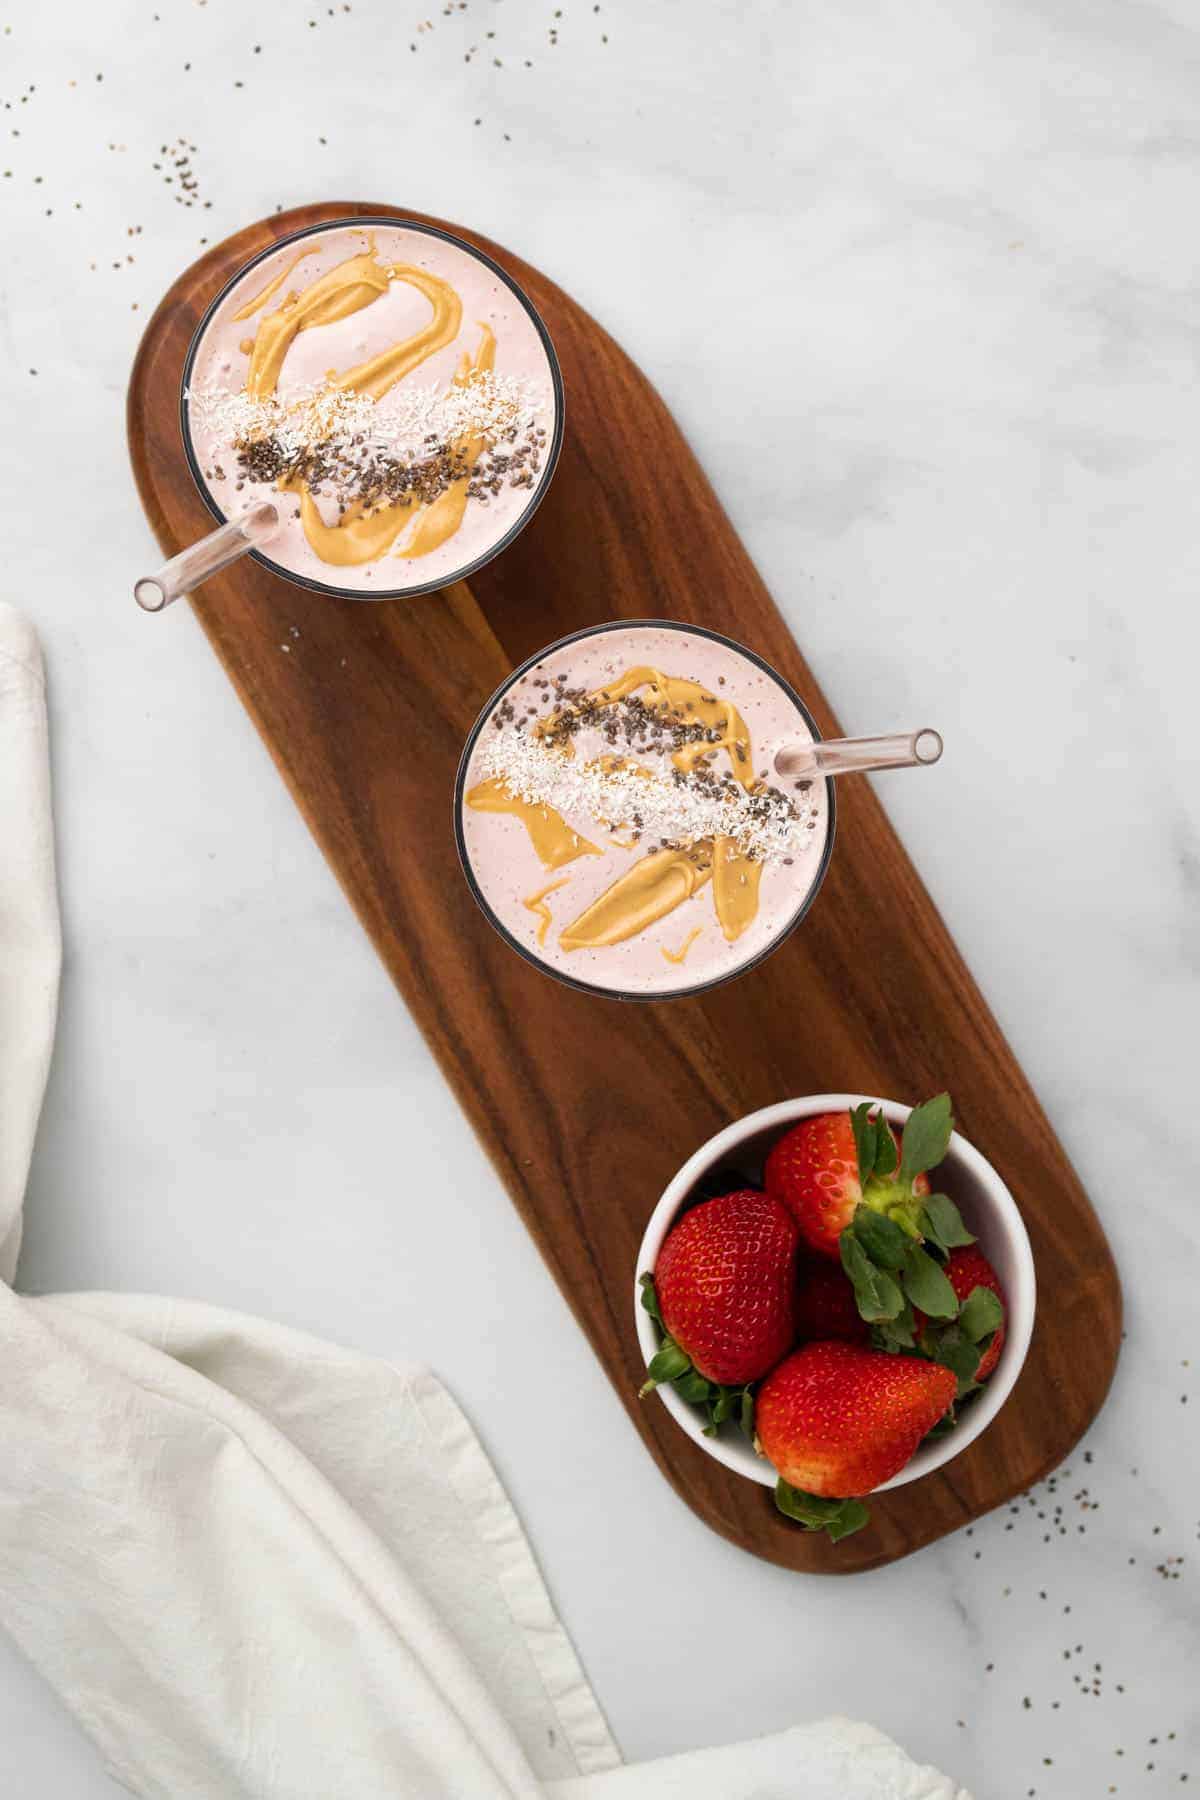 Two smoothies on a wooden board with a bowl of strawberries